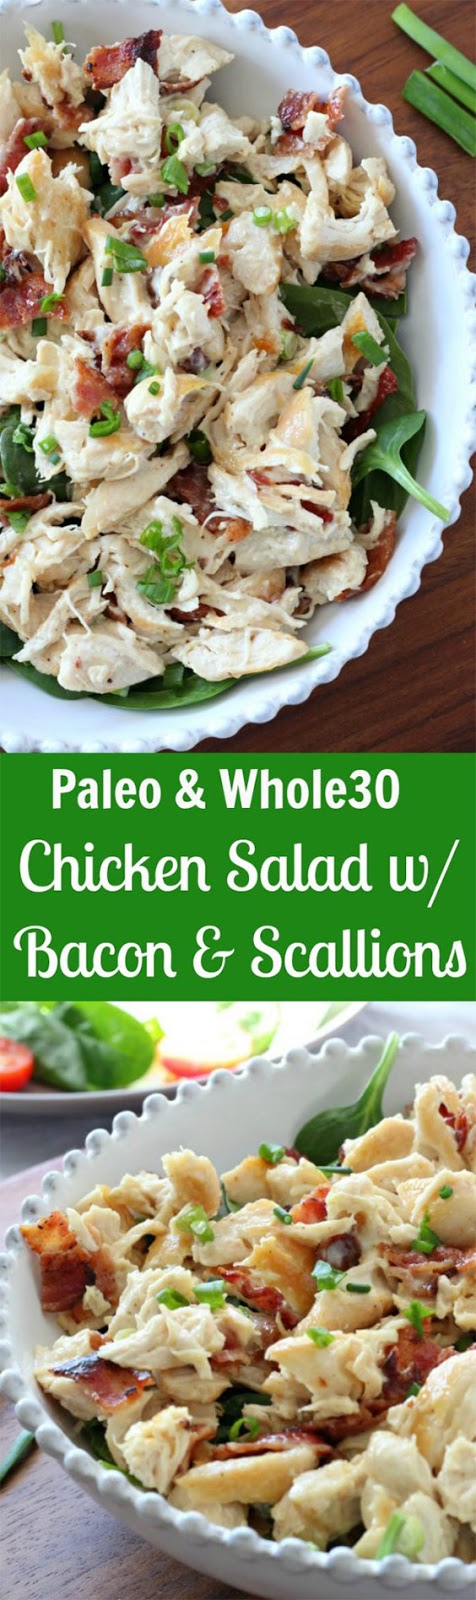 Paleo Chicken Salad with Bacon & Scallions (Whole30)